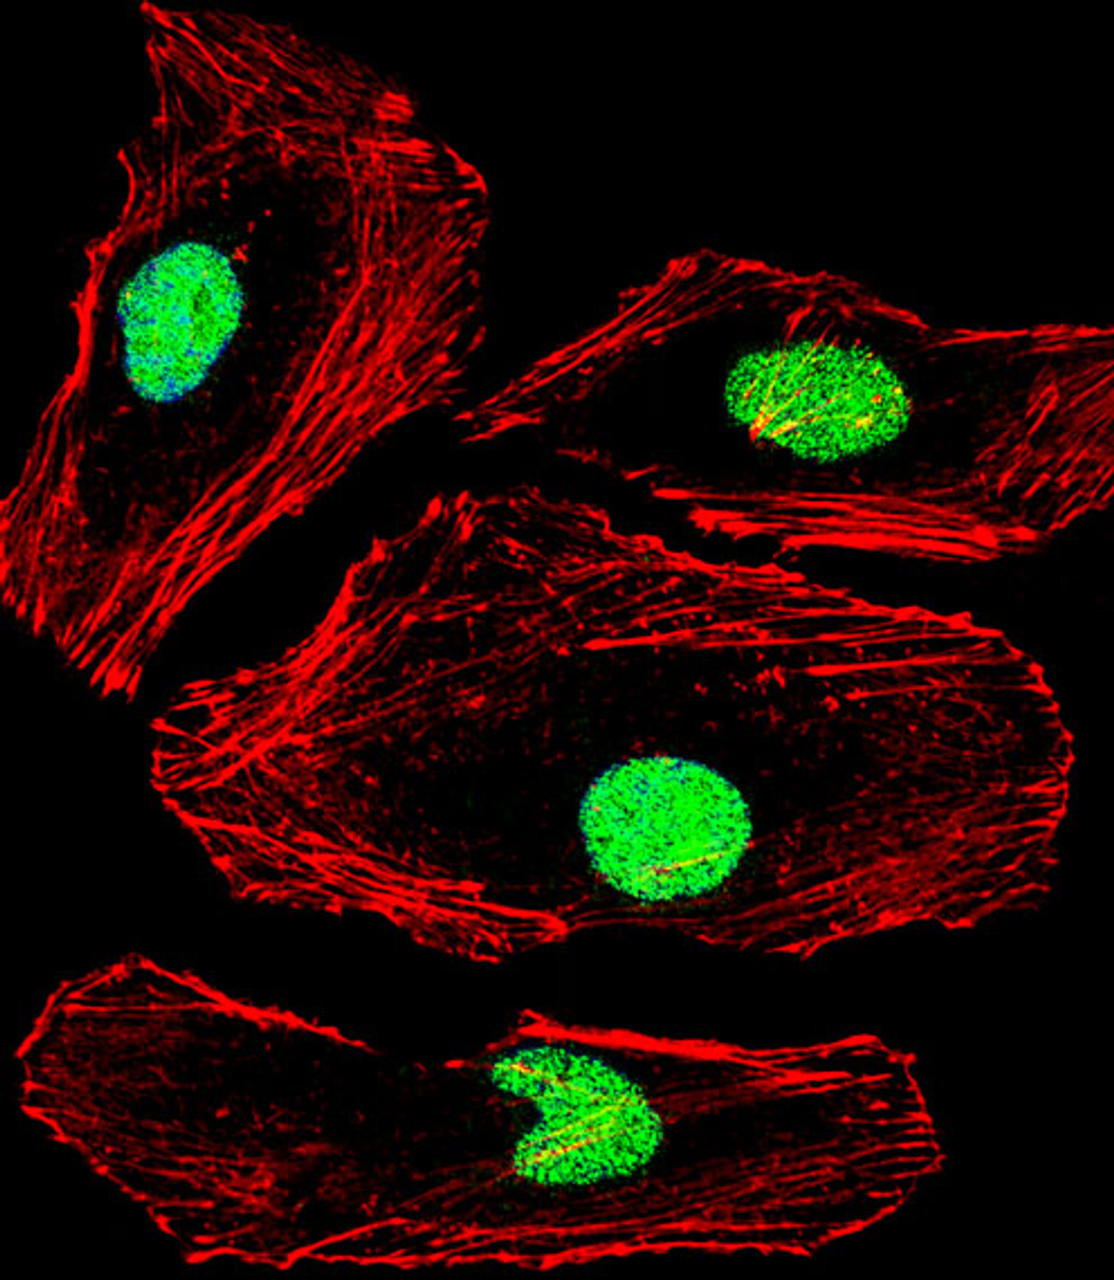 Fluorescent confocal image of Hela cell stained with MBD2 Antibody .Hela cells were fixed with 4% PFA (20 min) , permeabilized with Triton X-100 (0.1%, 10 min) , then incubated with MBD2 primary antibody (1:25) . For secondary antibody, Alexa Fluor 488 conjugated donkey anti-rabbit antibody (green) was used (1:400) .Cytoplasmic actin was counterstained with Alexa Fluor 555 (red) conjugated Phalloidin (7units/ml) . Nuclei were counterstained with DAPI (blue) (10 ug/ml, 10 min) .MBD2 immunoreactivity is localized to Nucleus significantly.